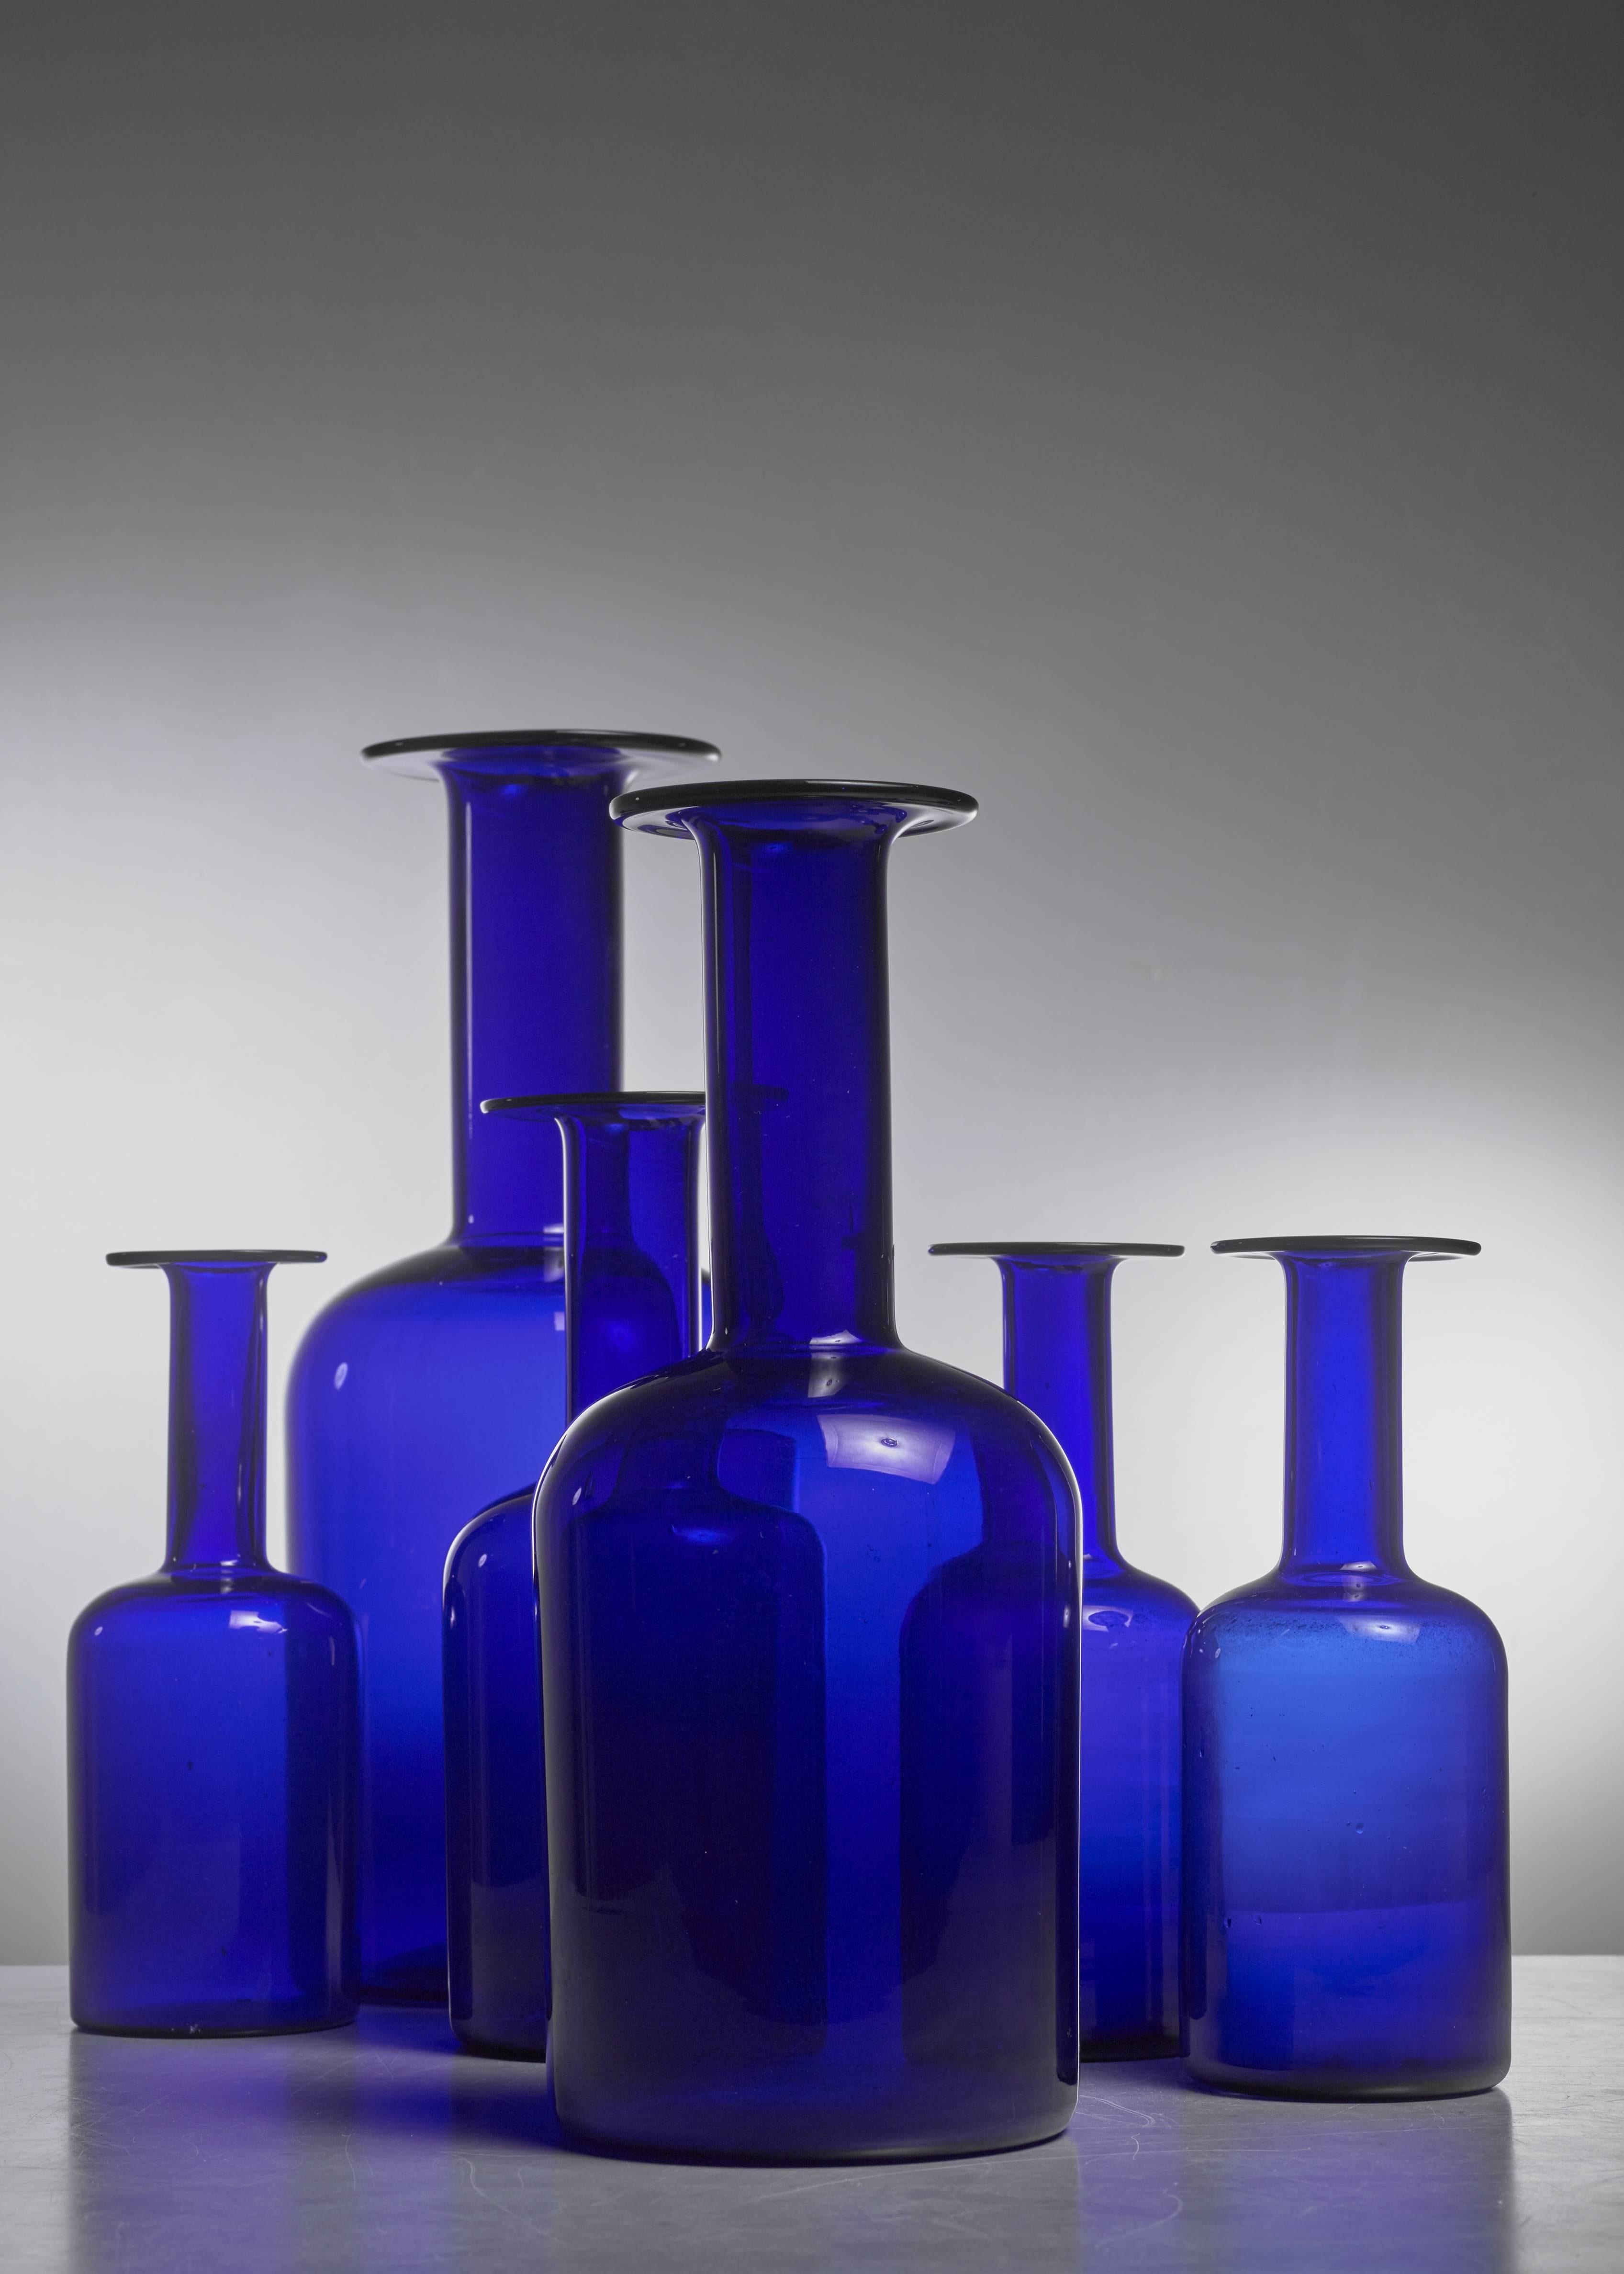 A set of six blue glass Gulvases in varying sizes, designed by Otto Brauer for Danish company Holmegaard.

Measures: The smallest vase is 25 cm high with a 9.5 cm diameter. The tallest one is 43.5 cm high with a 17.5 cm diameter.

The middle